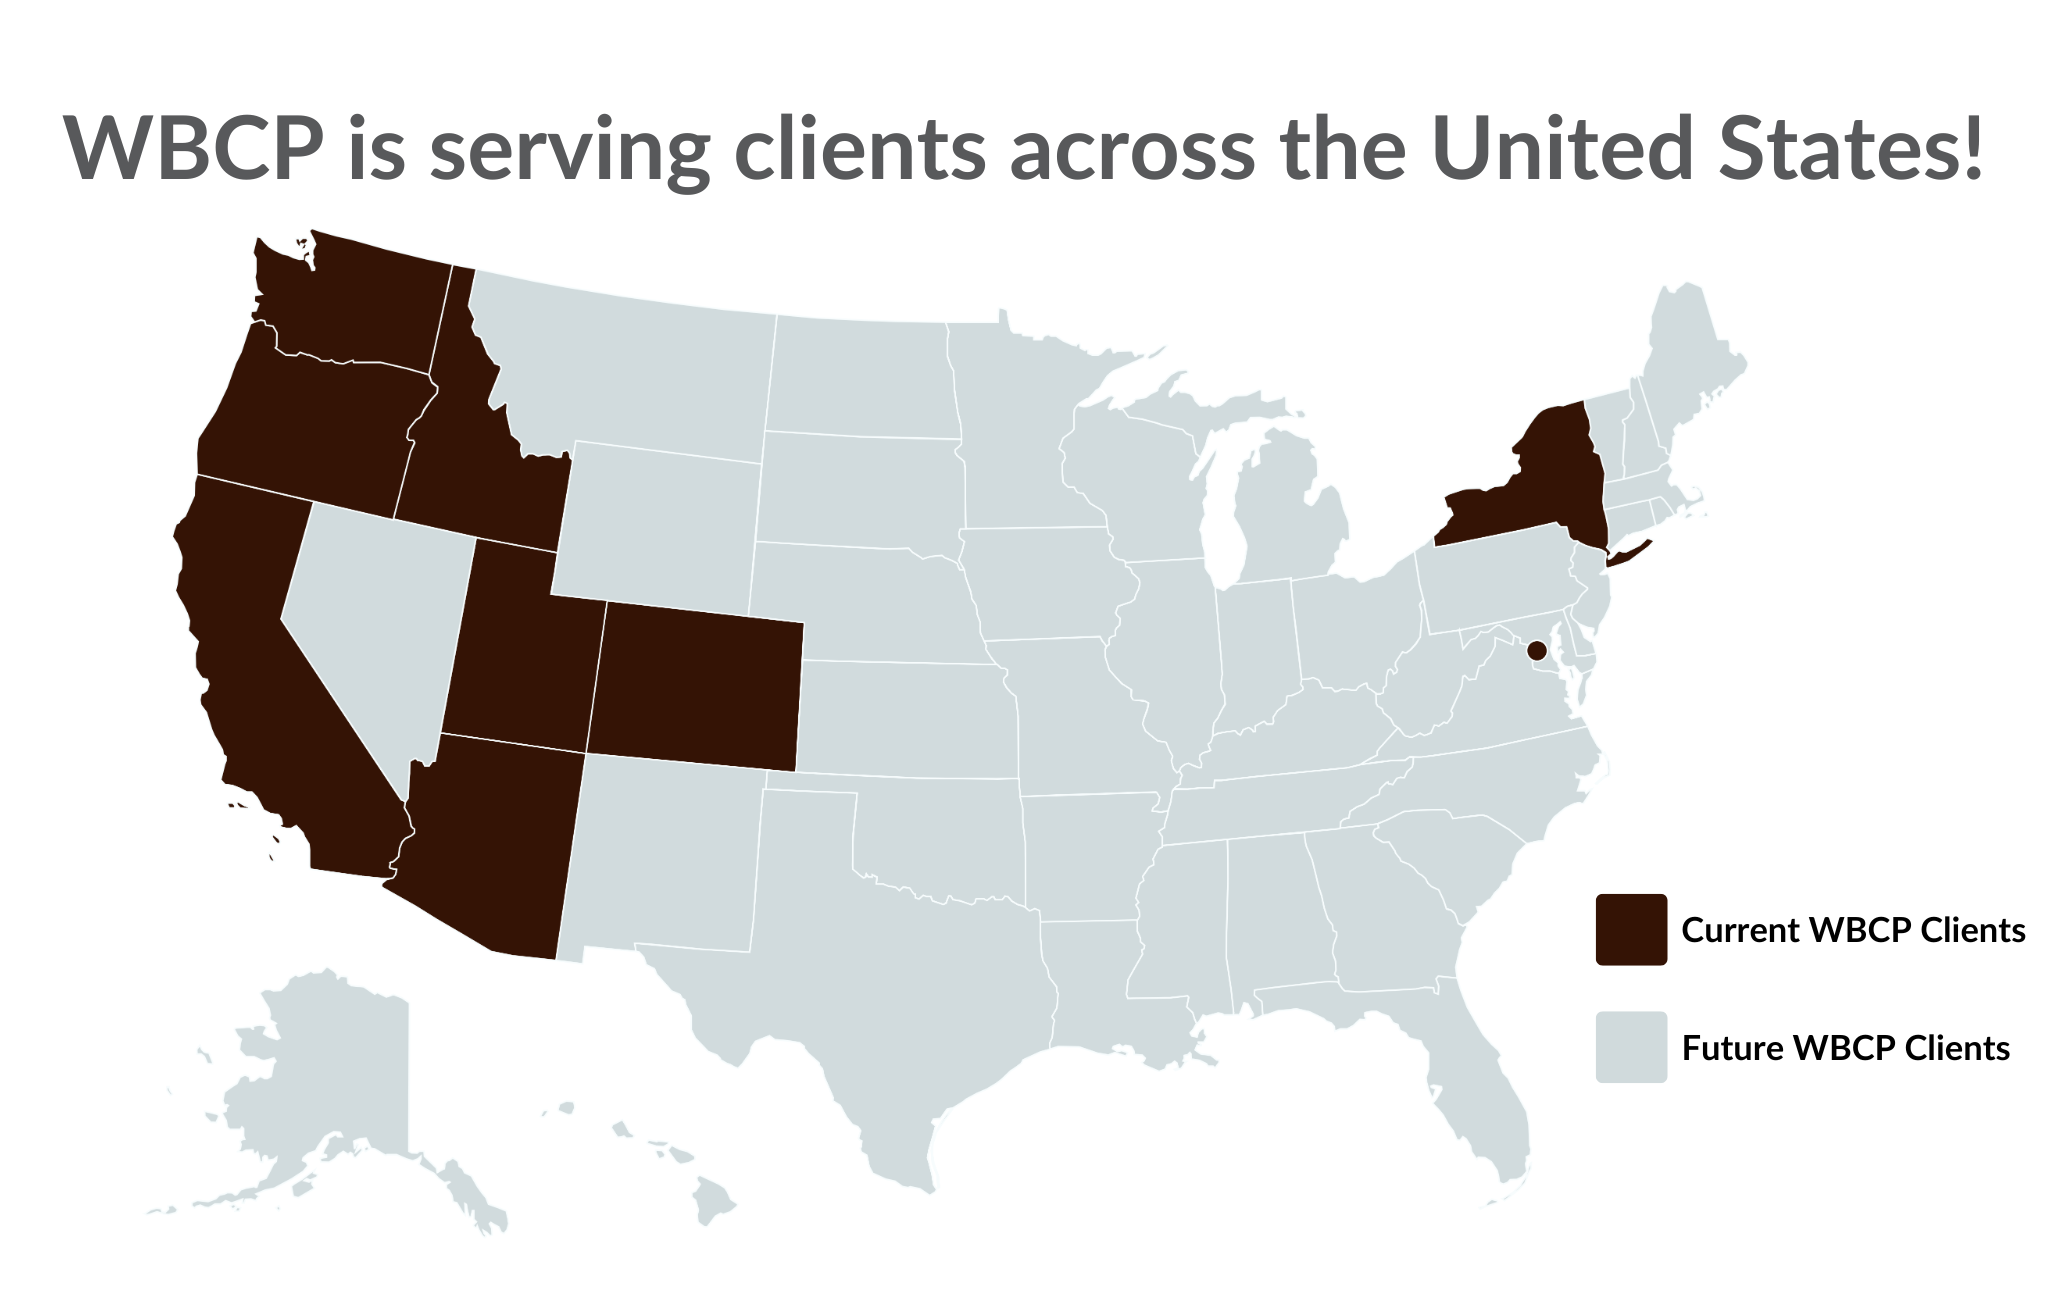 WBCP Client Map of the U.S.